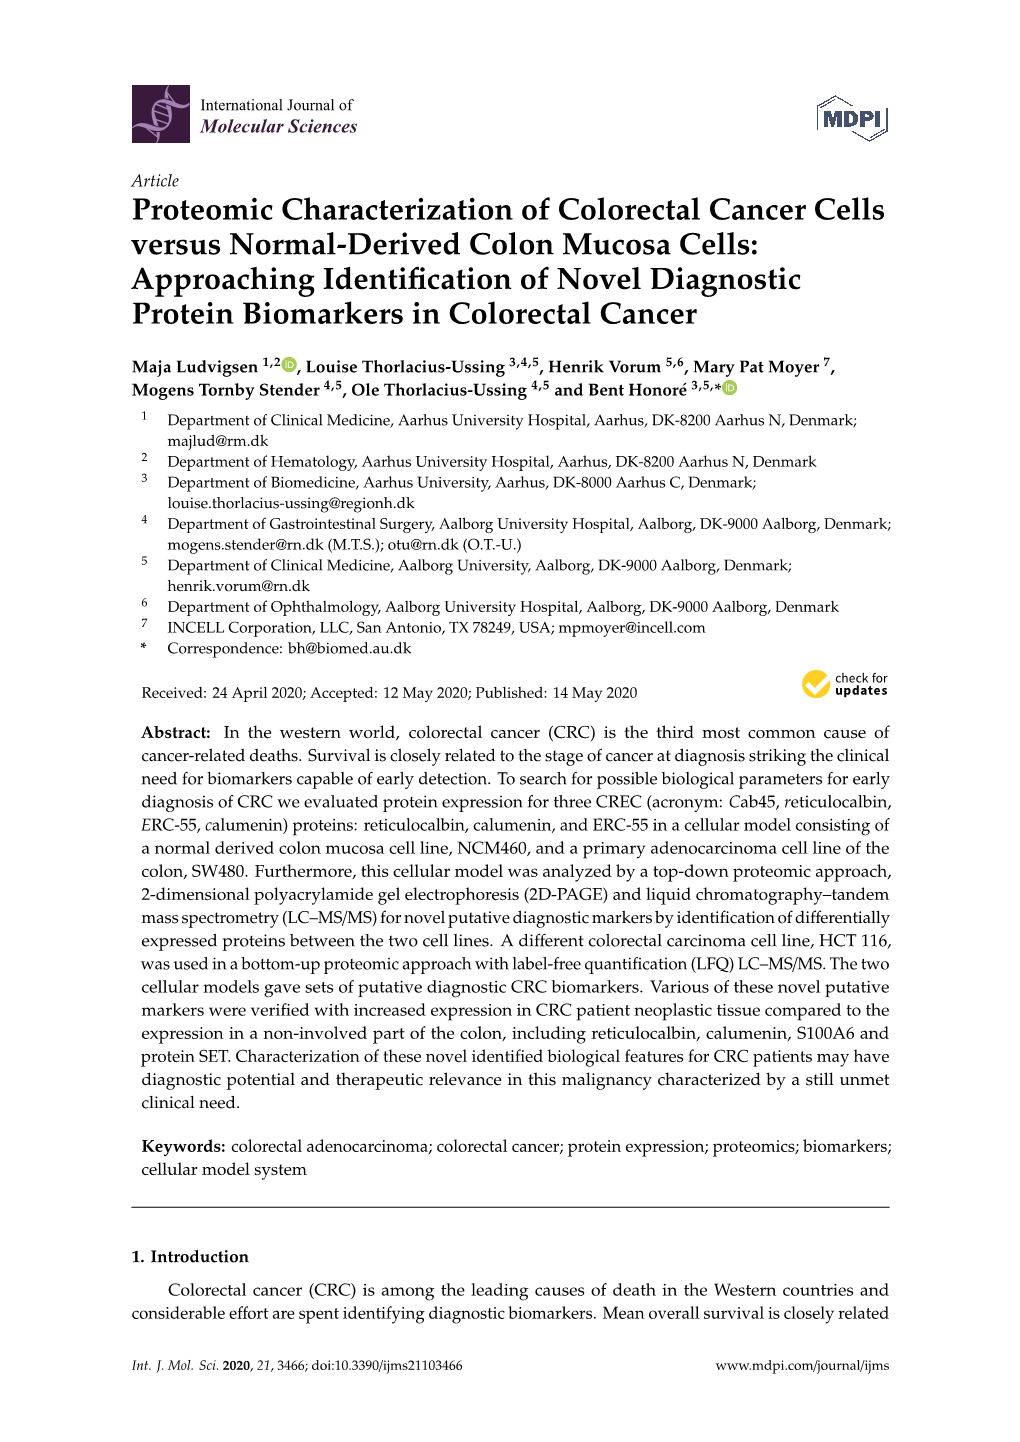 Proteomic Characterization of Colorectal Cancer Cells Versus Normal-Derived Colon Mucosa Cells